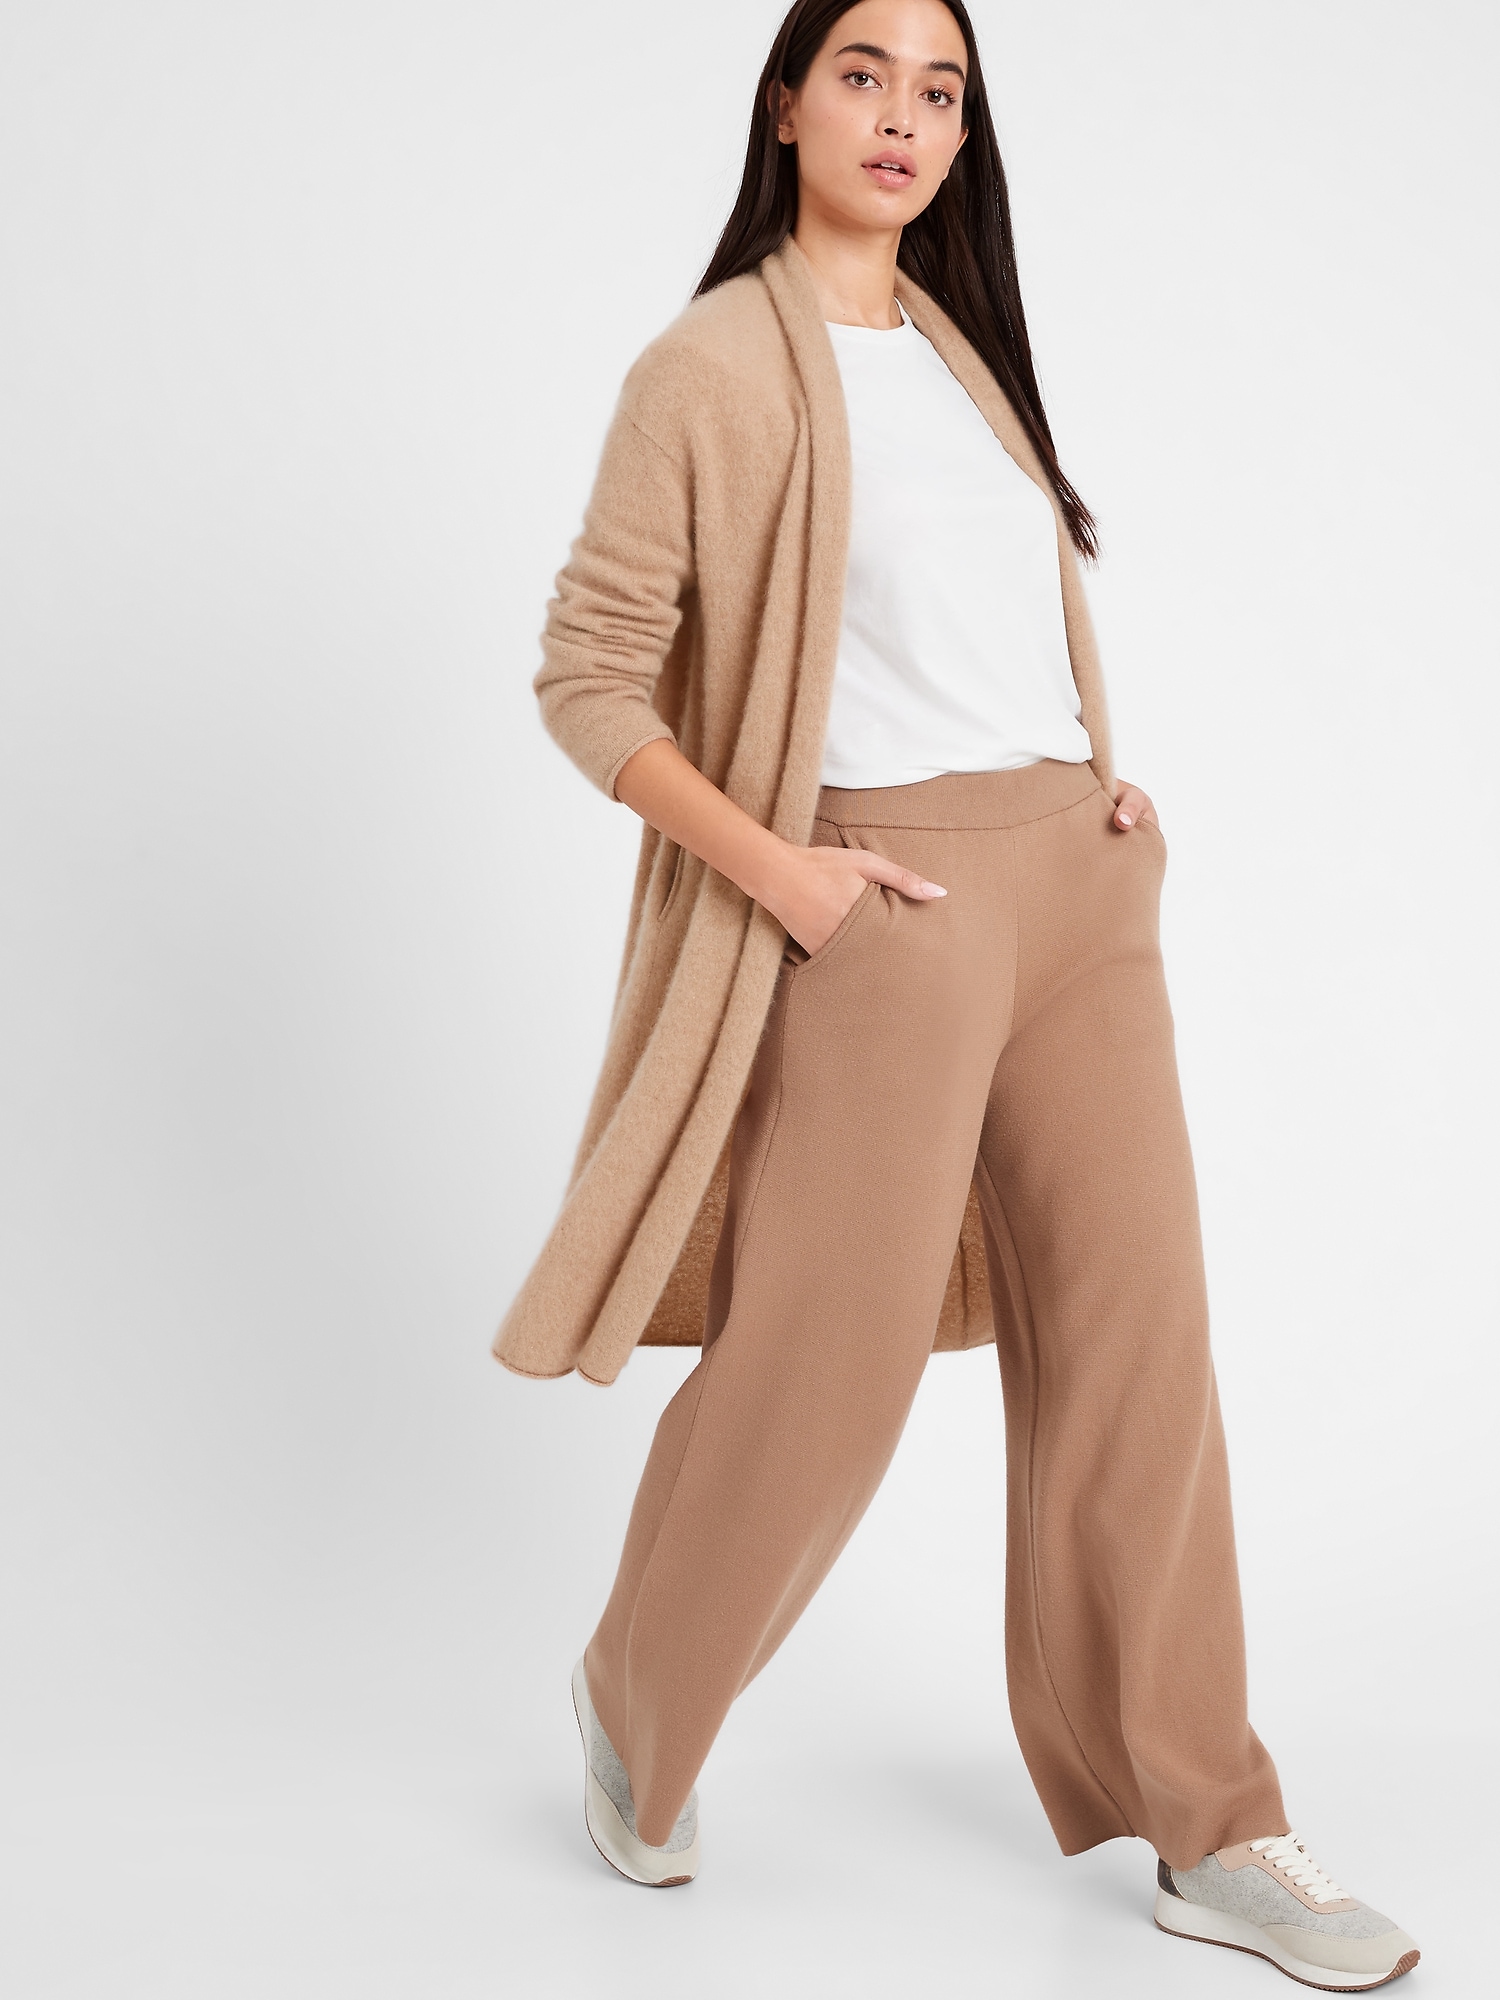 Brushed Cashmere Duster Cardigan Sweater